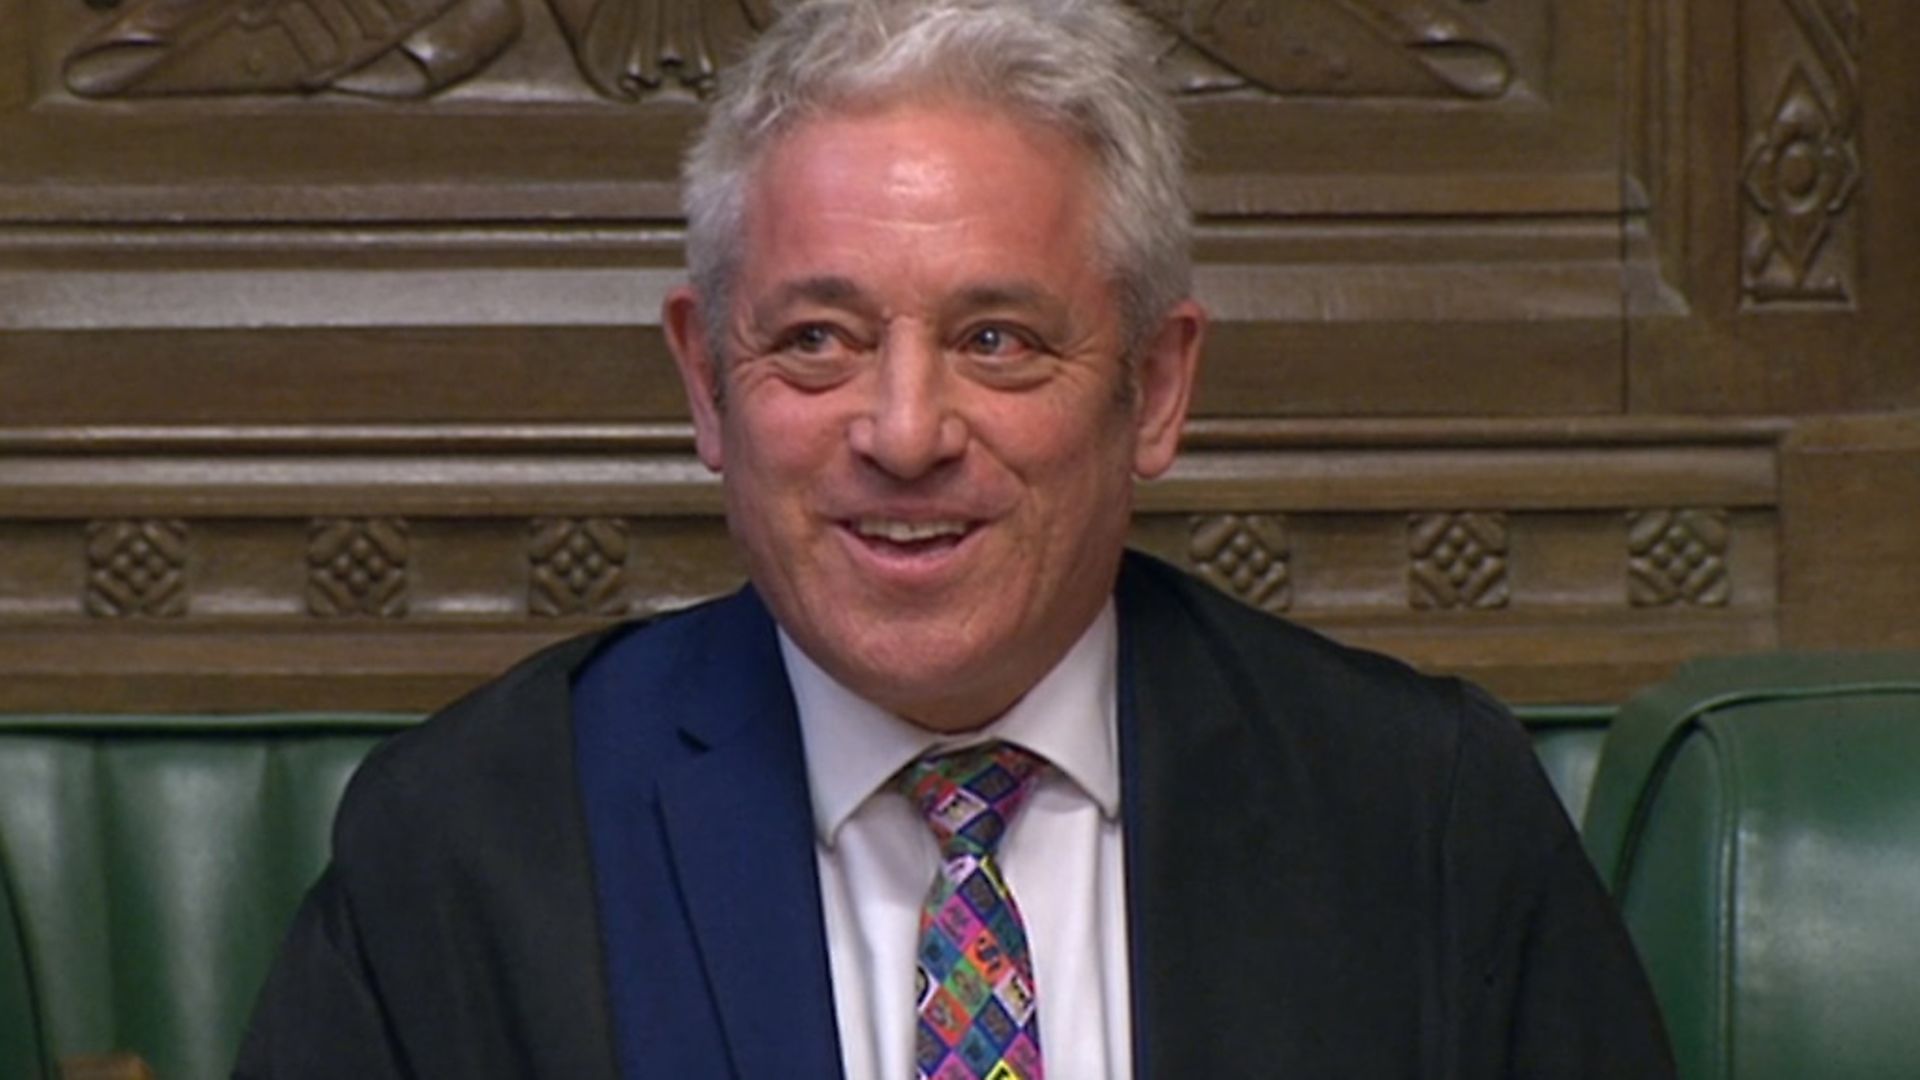 Speaker John Bercow in the House of Commons. Photograph: House of Commons/PA Wire - Credit: PA